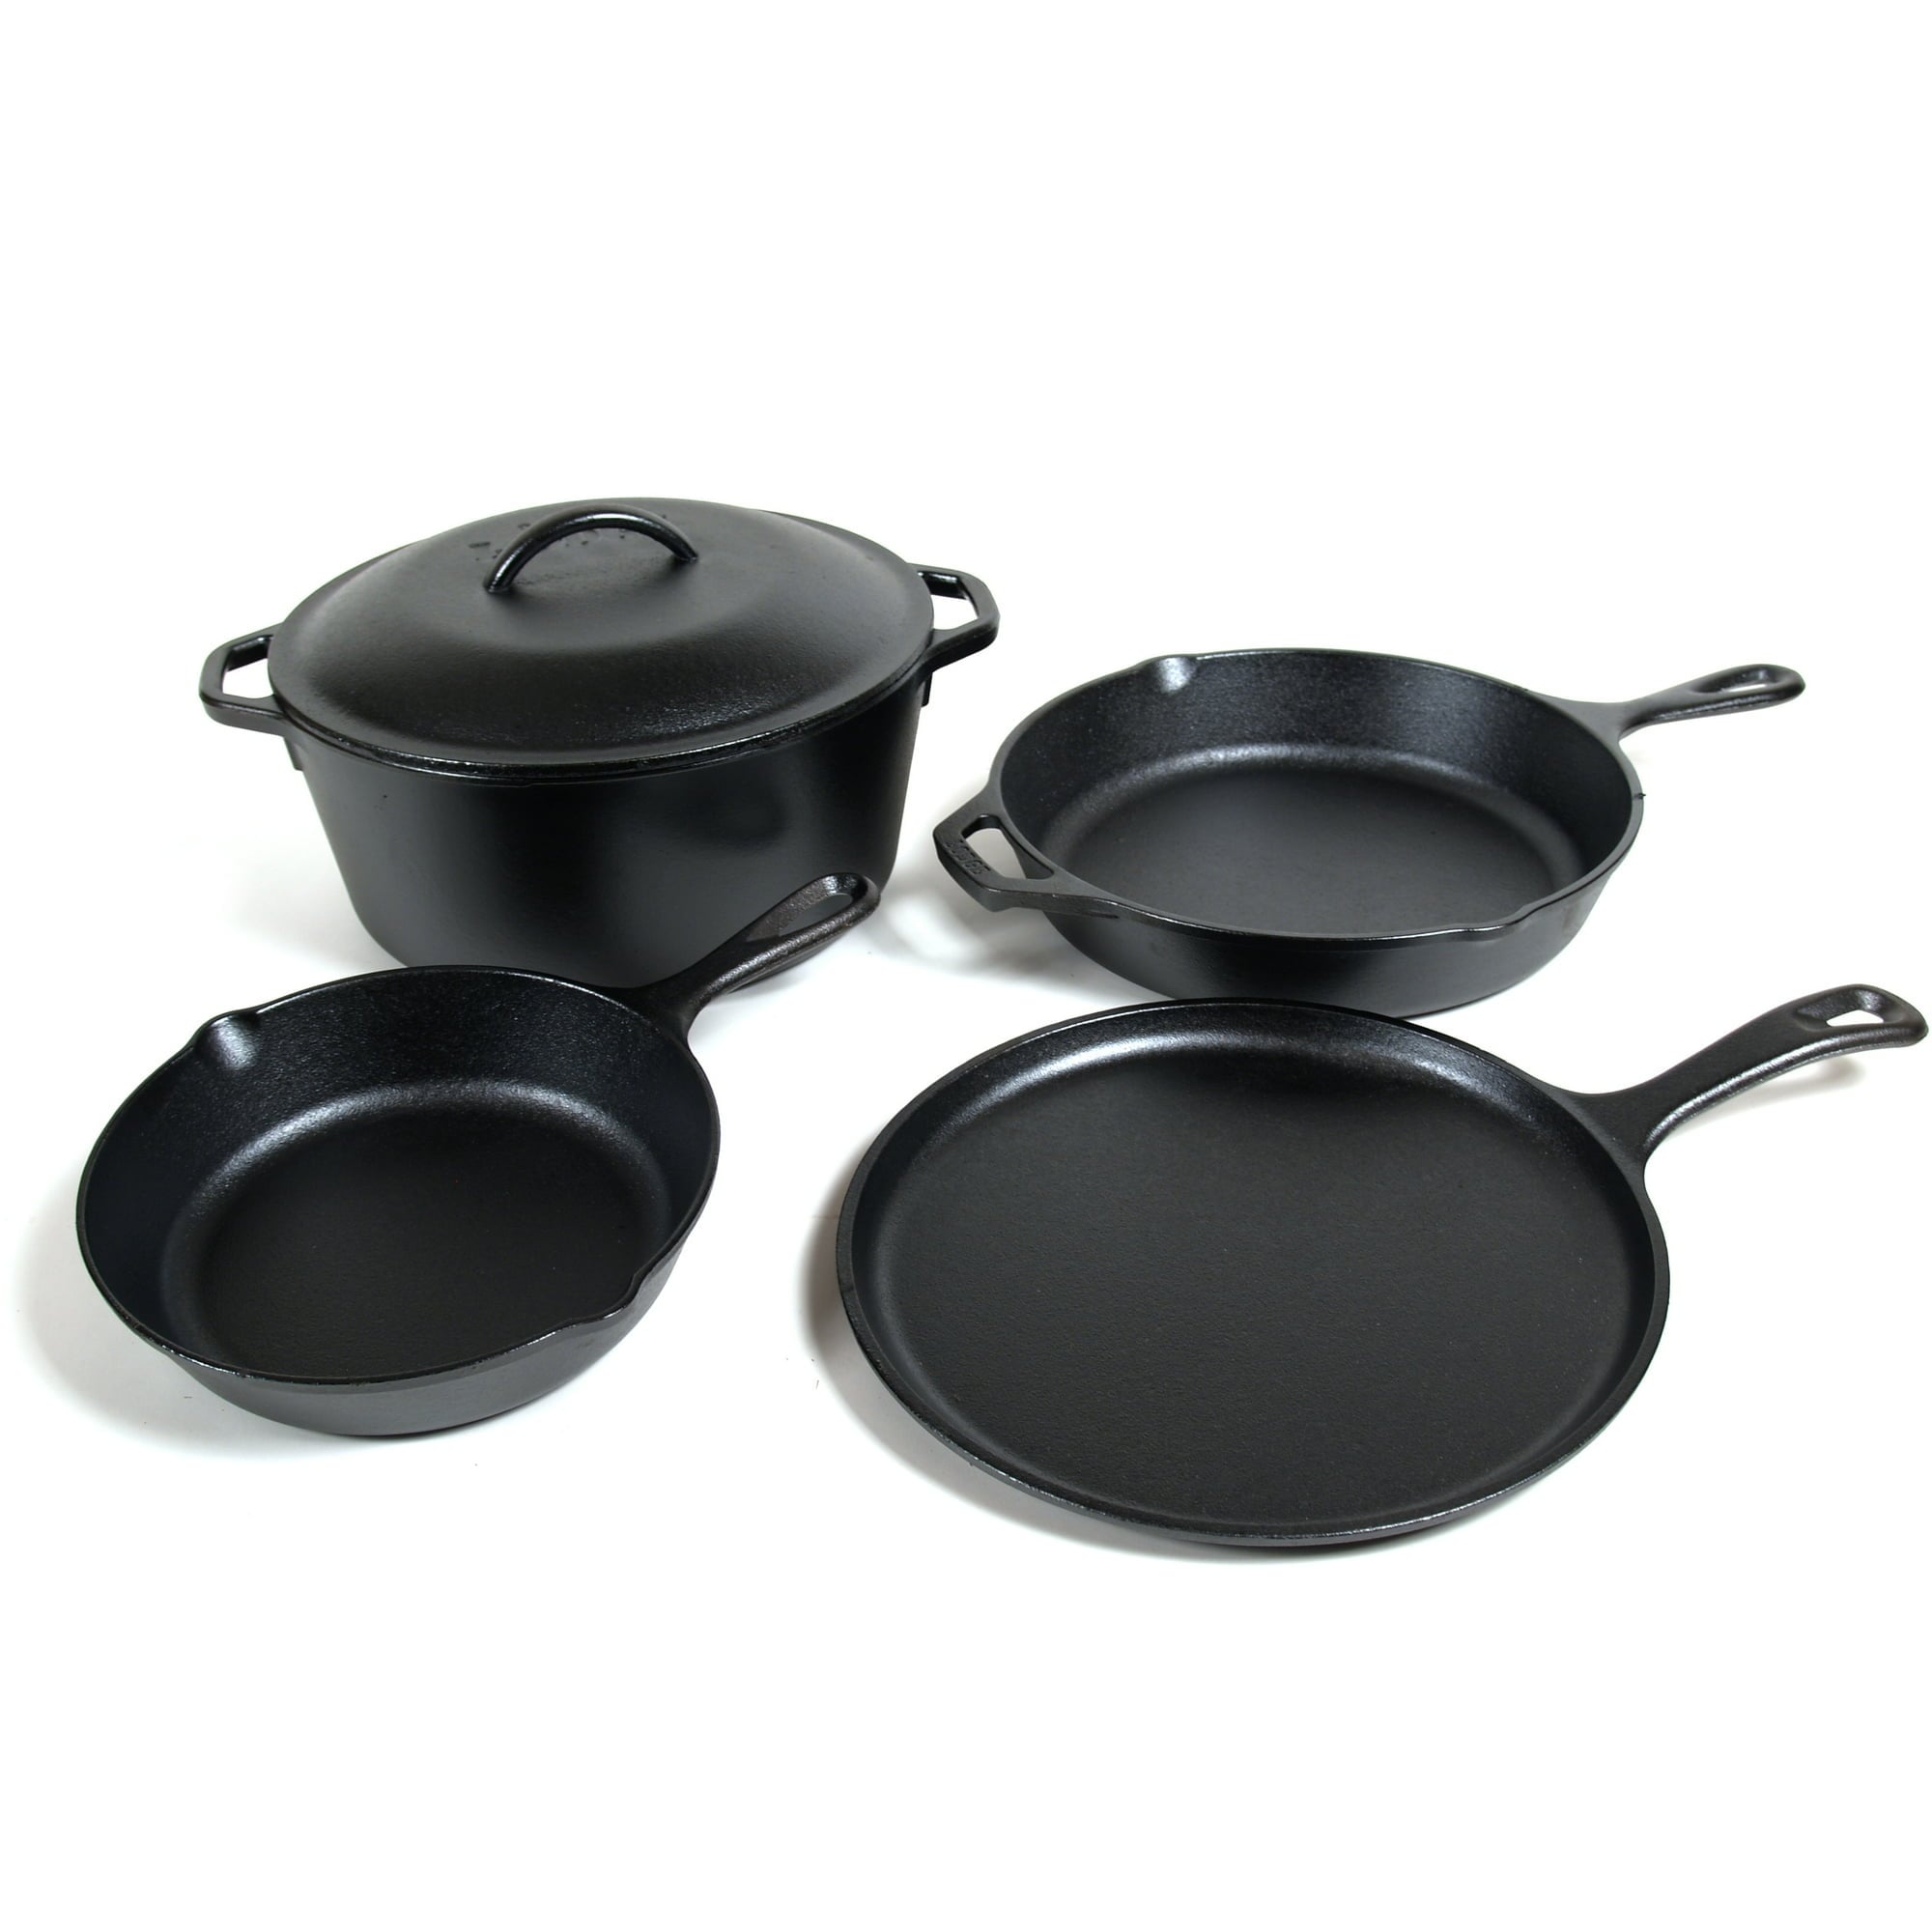 Bayou Seasoned Large 20 Inch Cast Iron Cooking Cookware Skillet Pan (2  Pack) 